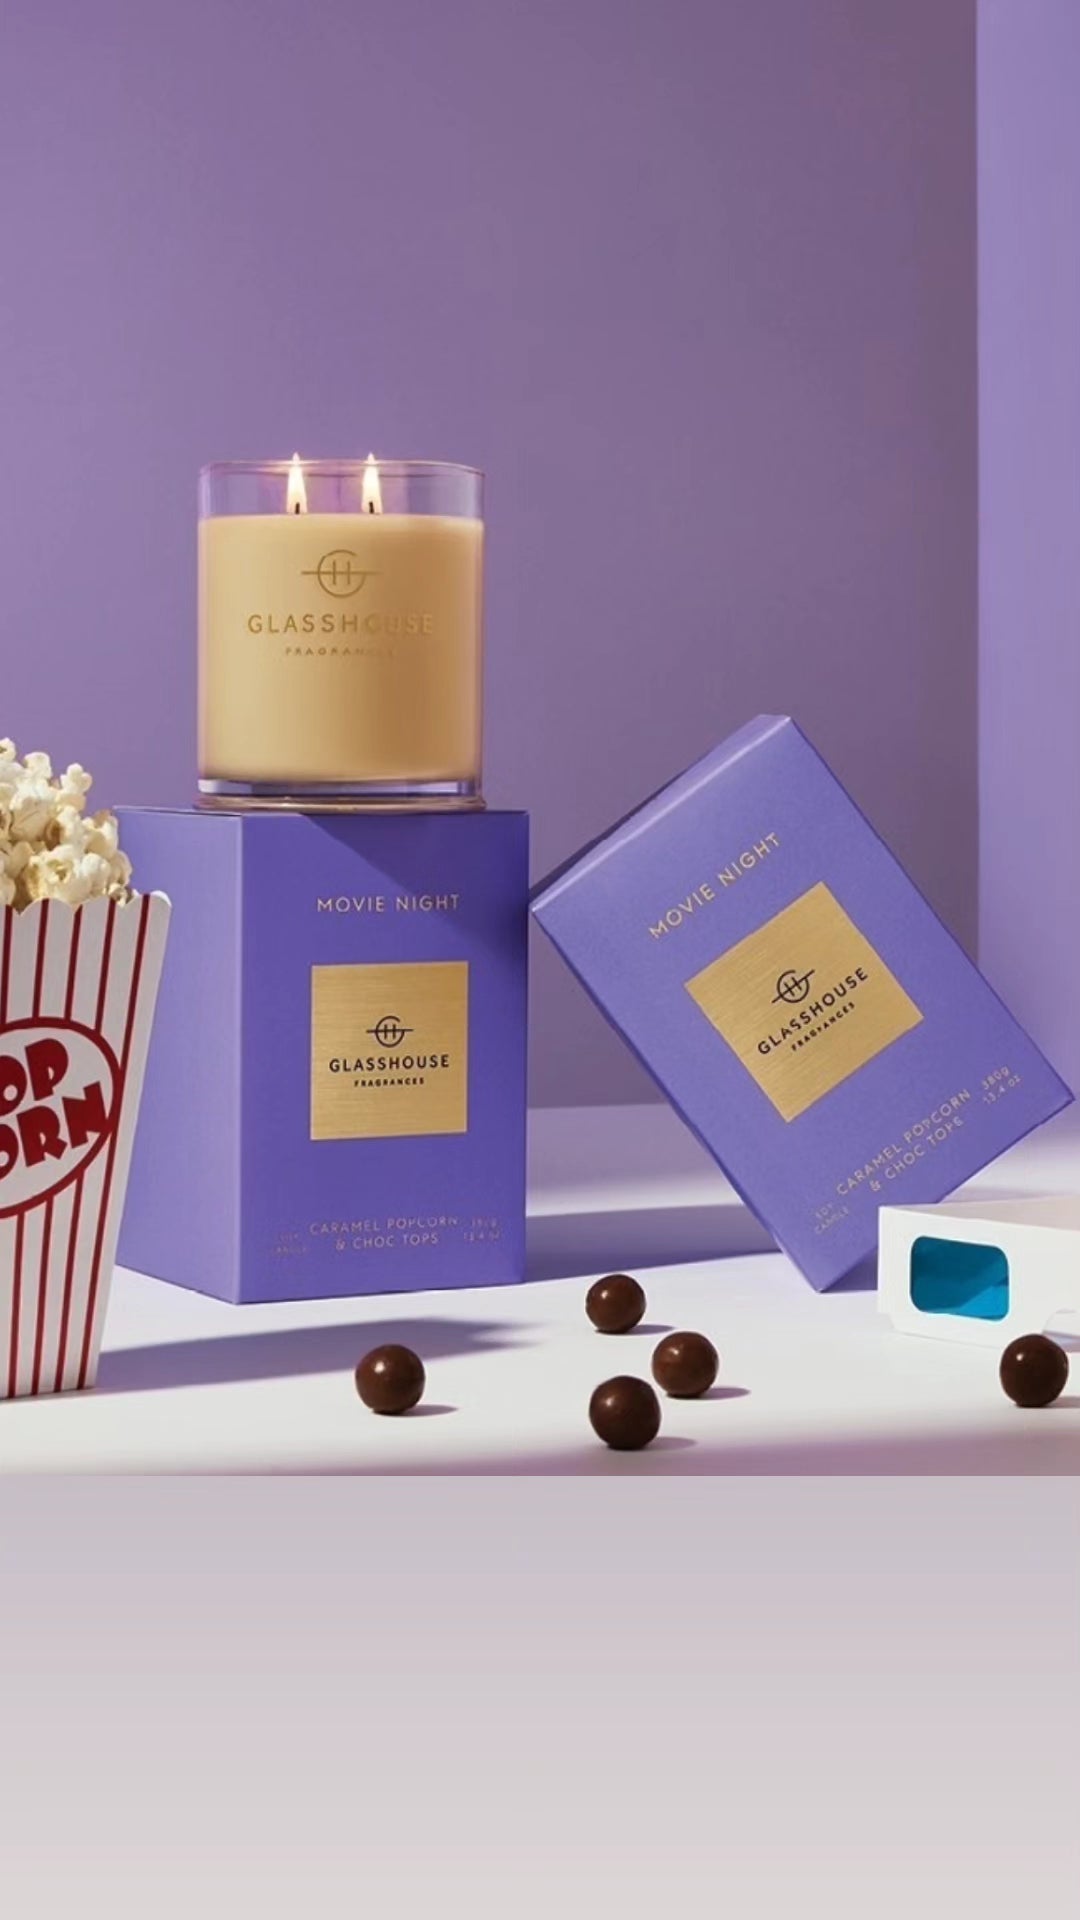 Glasshouse Movie Night Soy Candle 380g - Exquisite Laser Clinic 